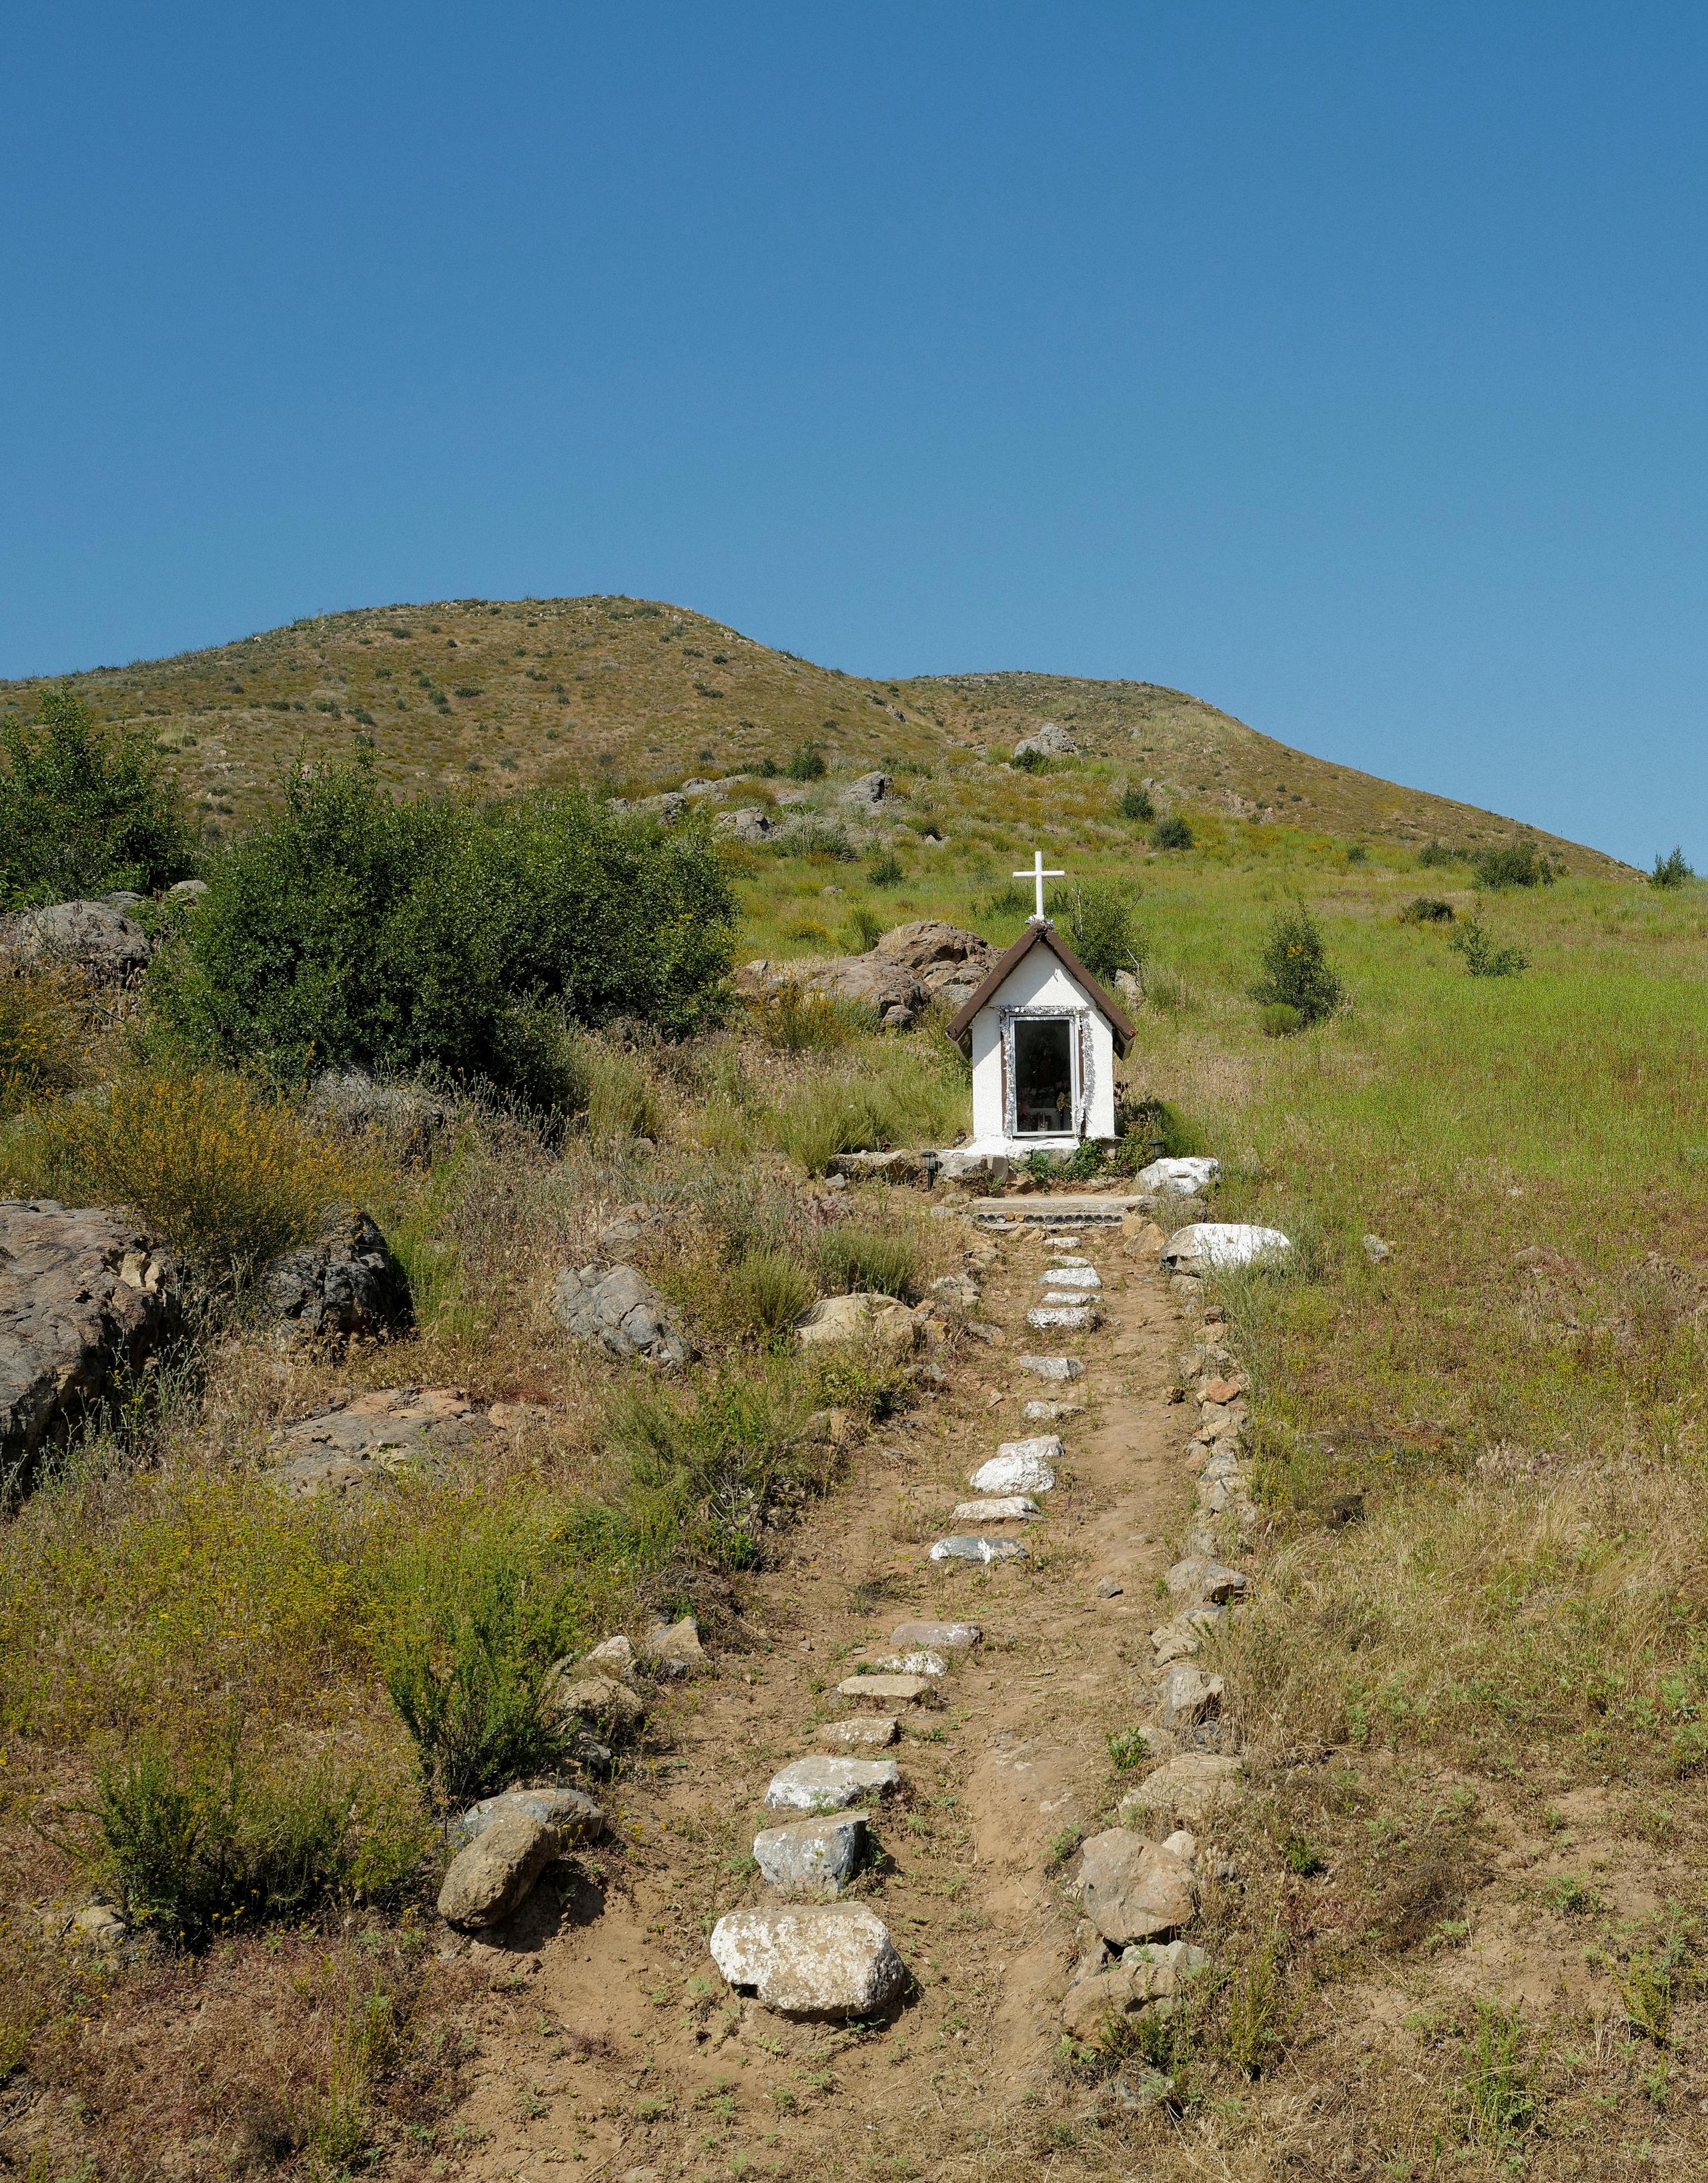 Small church in rural Baja California landscape with dirt and stone path